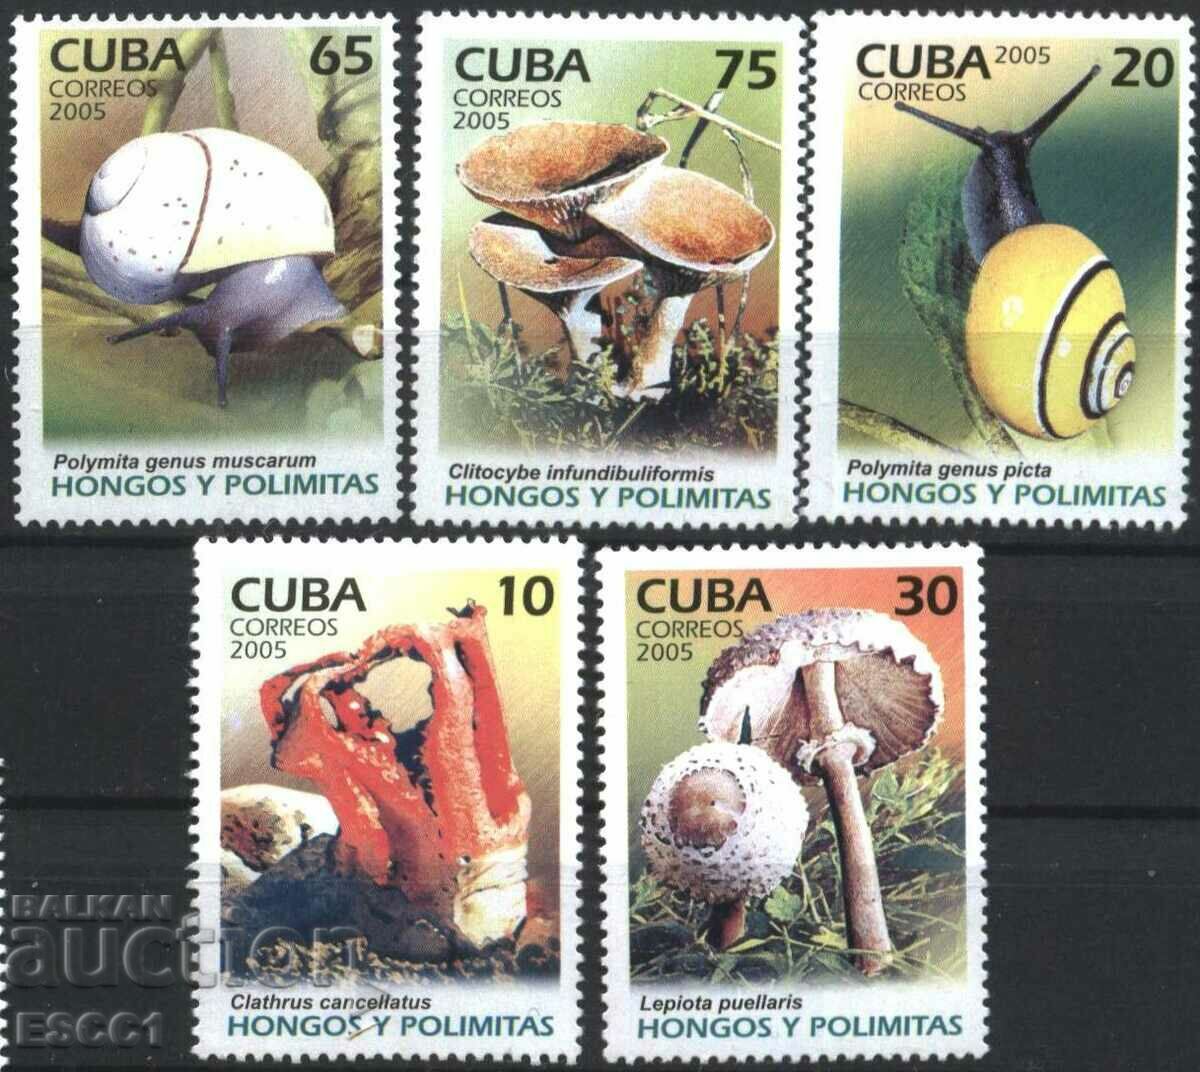 Chisi stamps Flora and Fauna, Mushrooms and Snails 2005 from Cuba